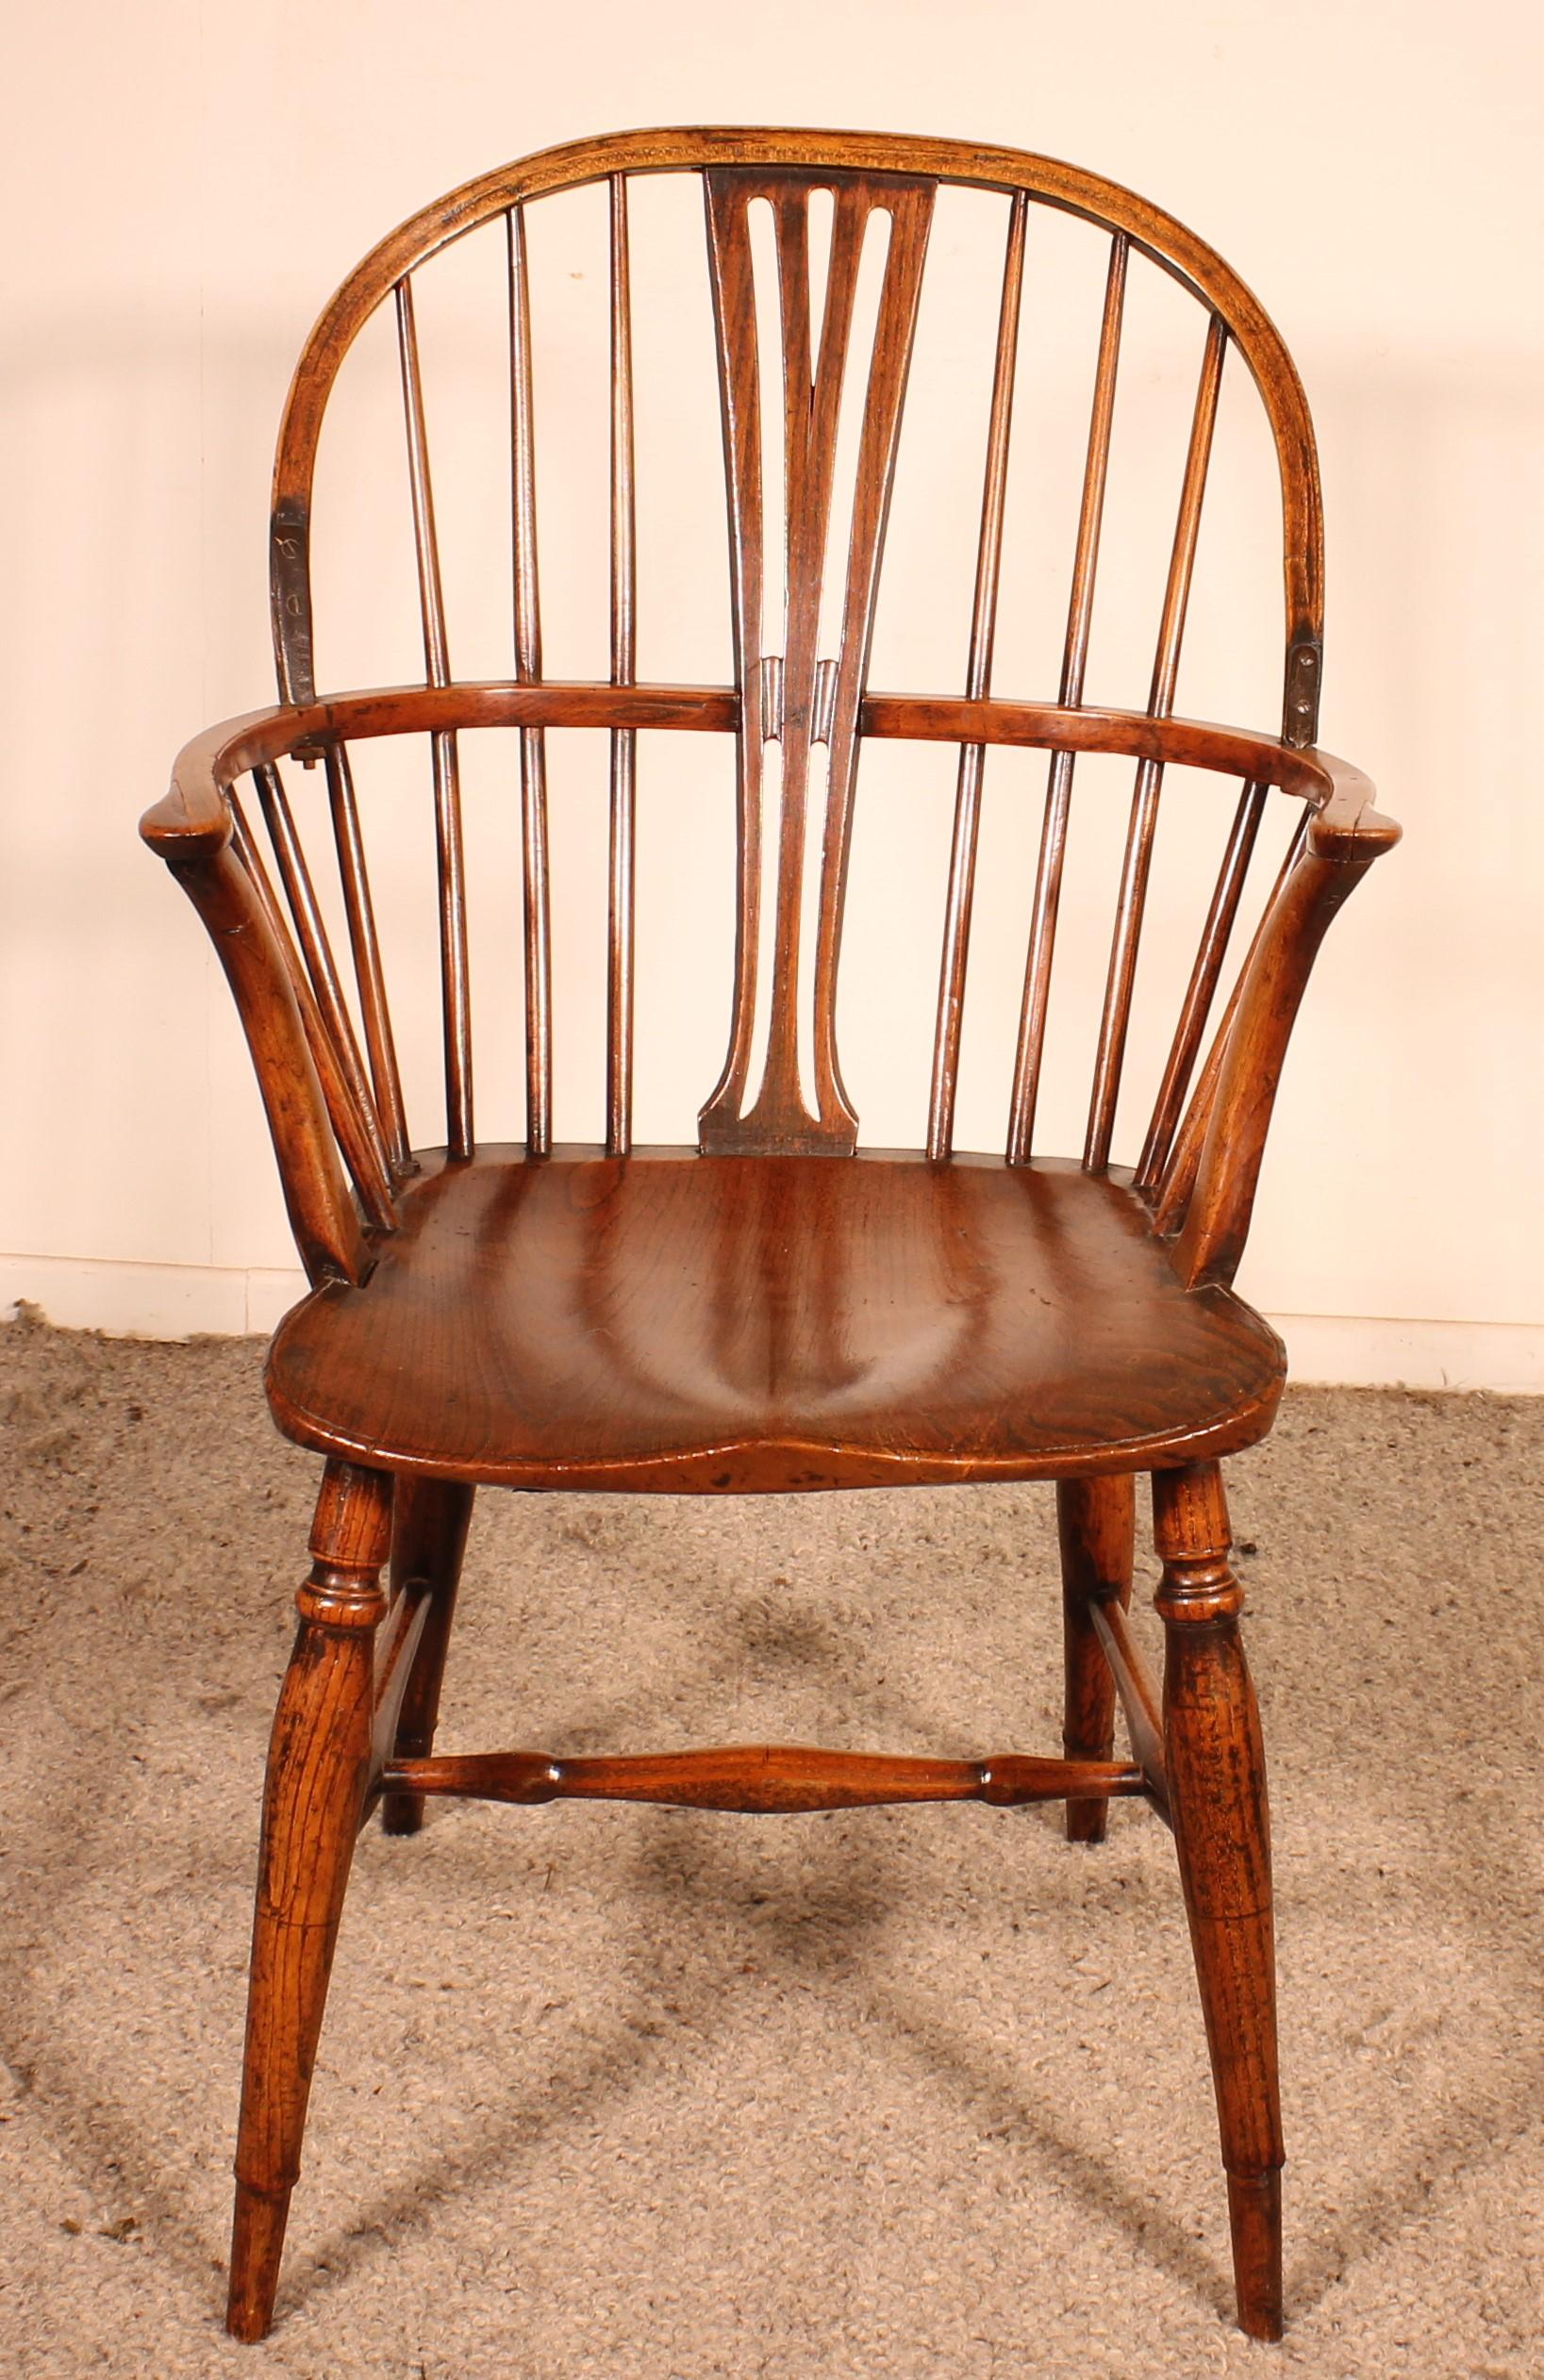 Elegant English Windsor armchair from the beginning of the 19th century in chestnut

Very beautiful patina and in superb condition.

Very elegant armchair which stands out by its back with fine slats which is unusual. Two 19th century wrought iron